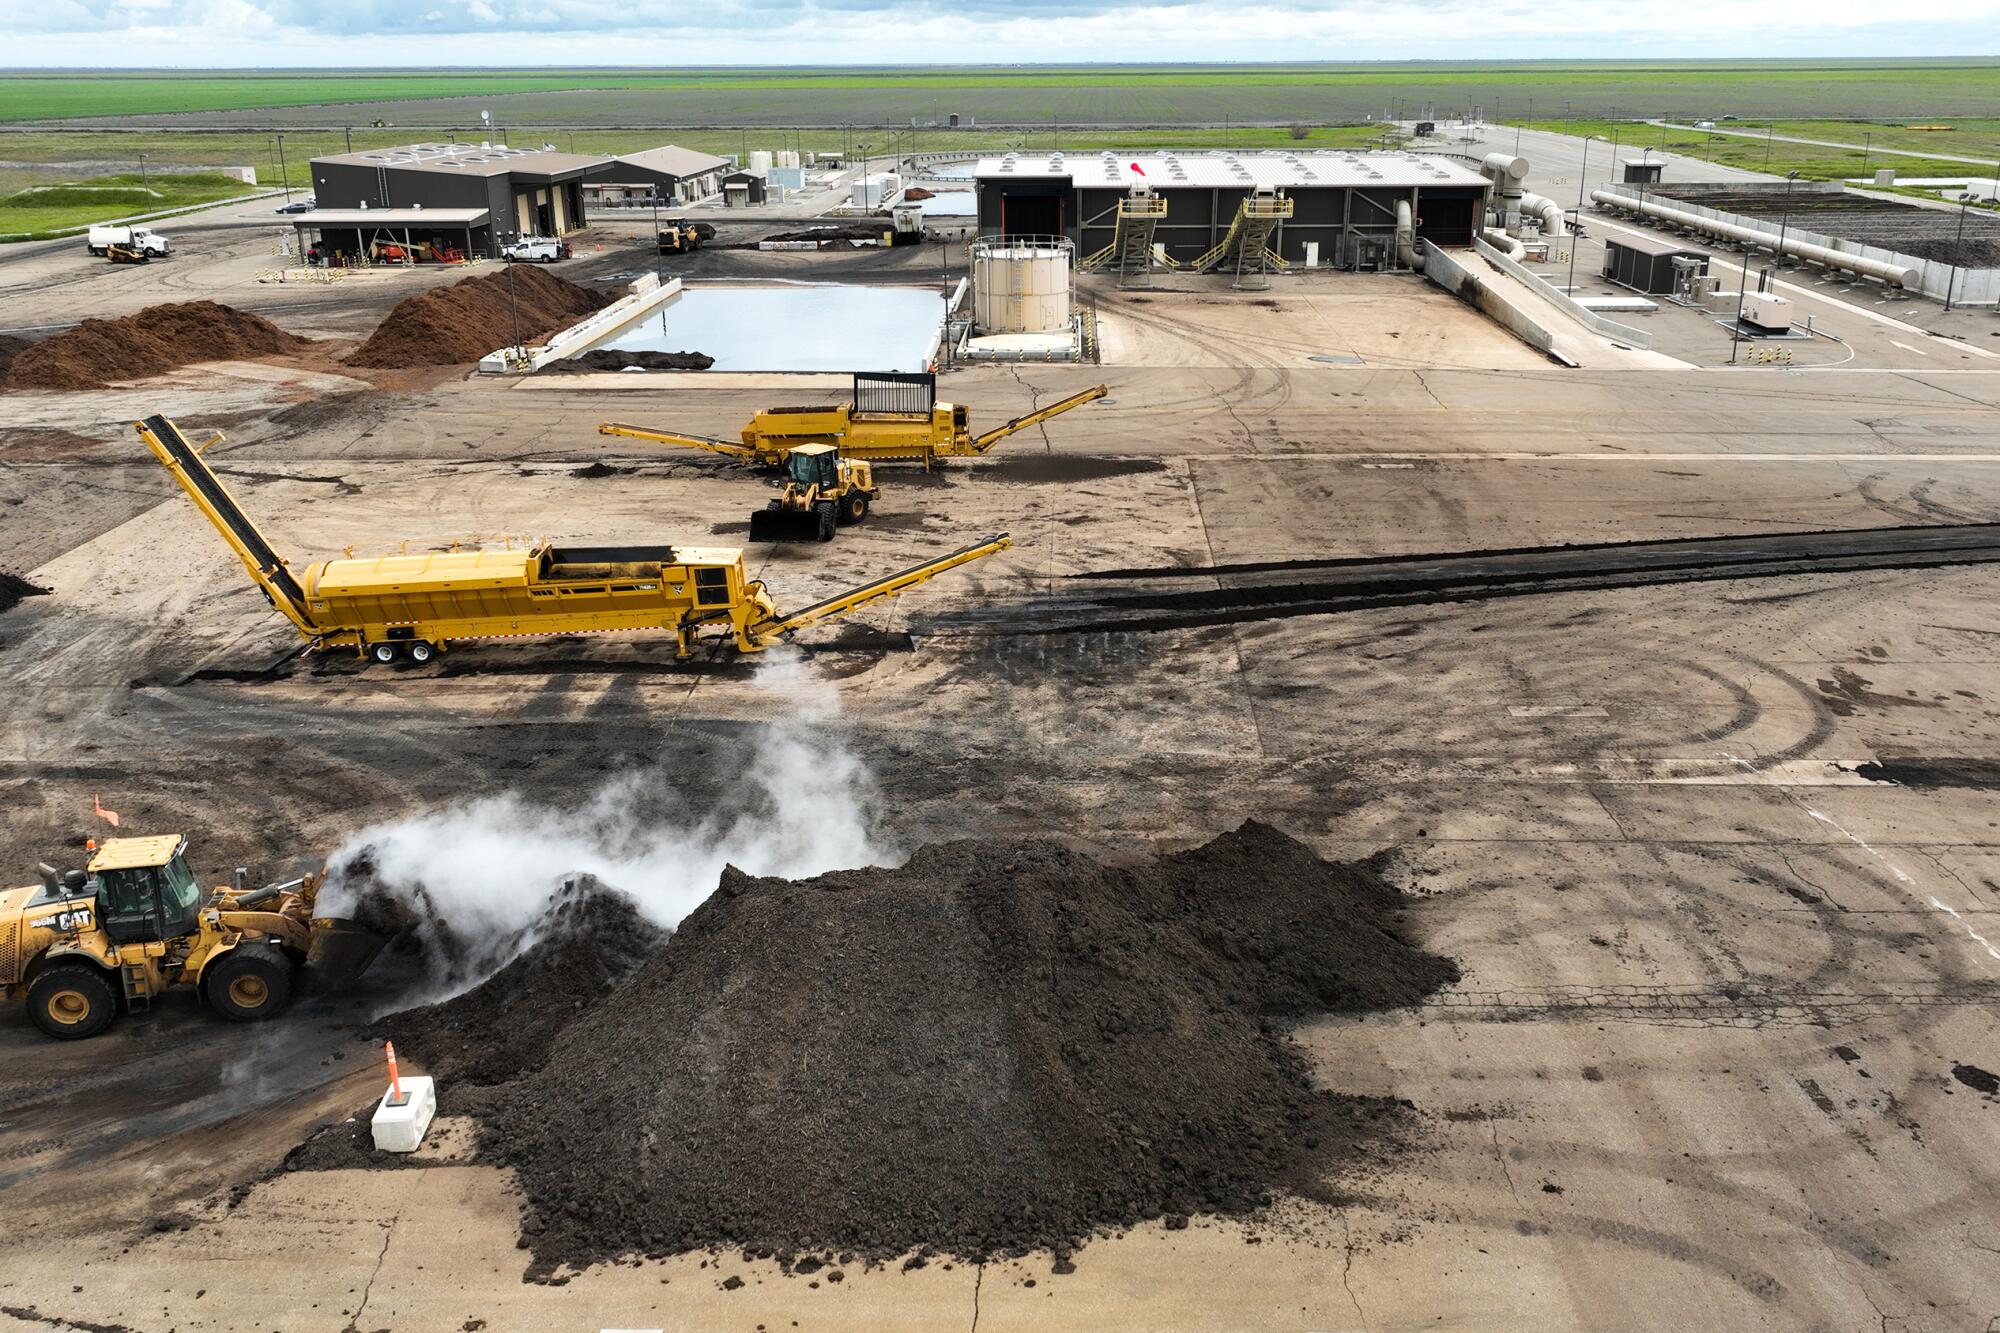 Heavy machinery and piles of compost at a sprawling facility.